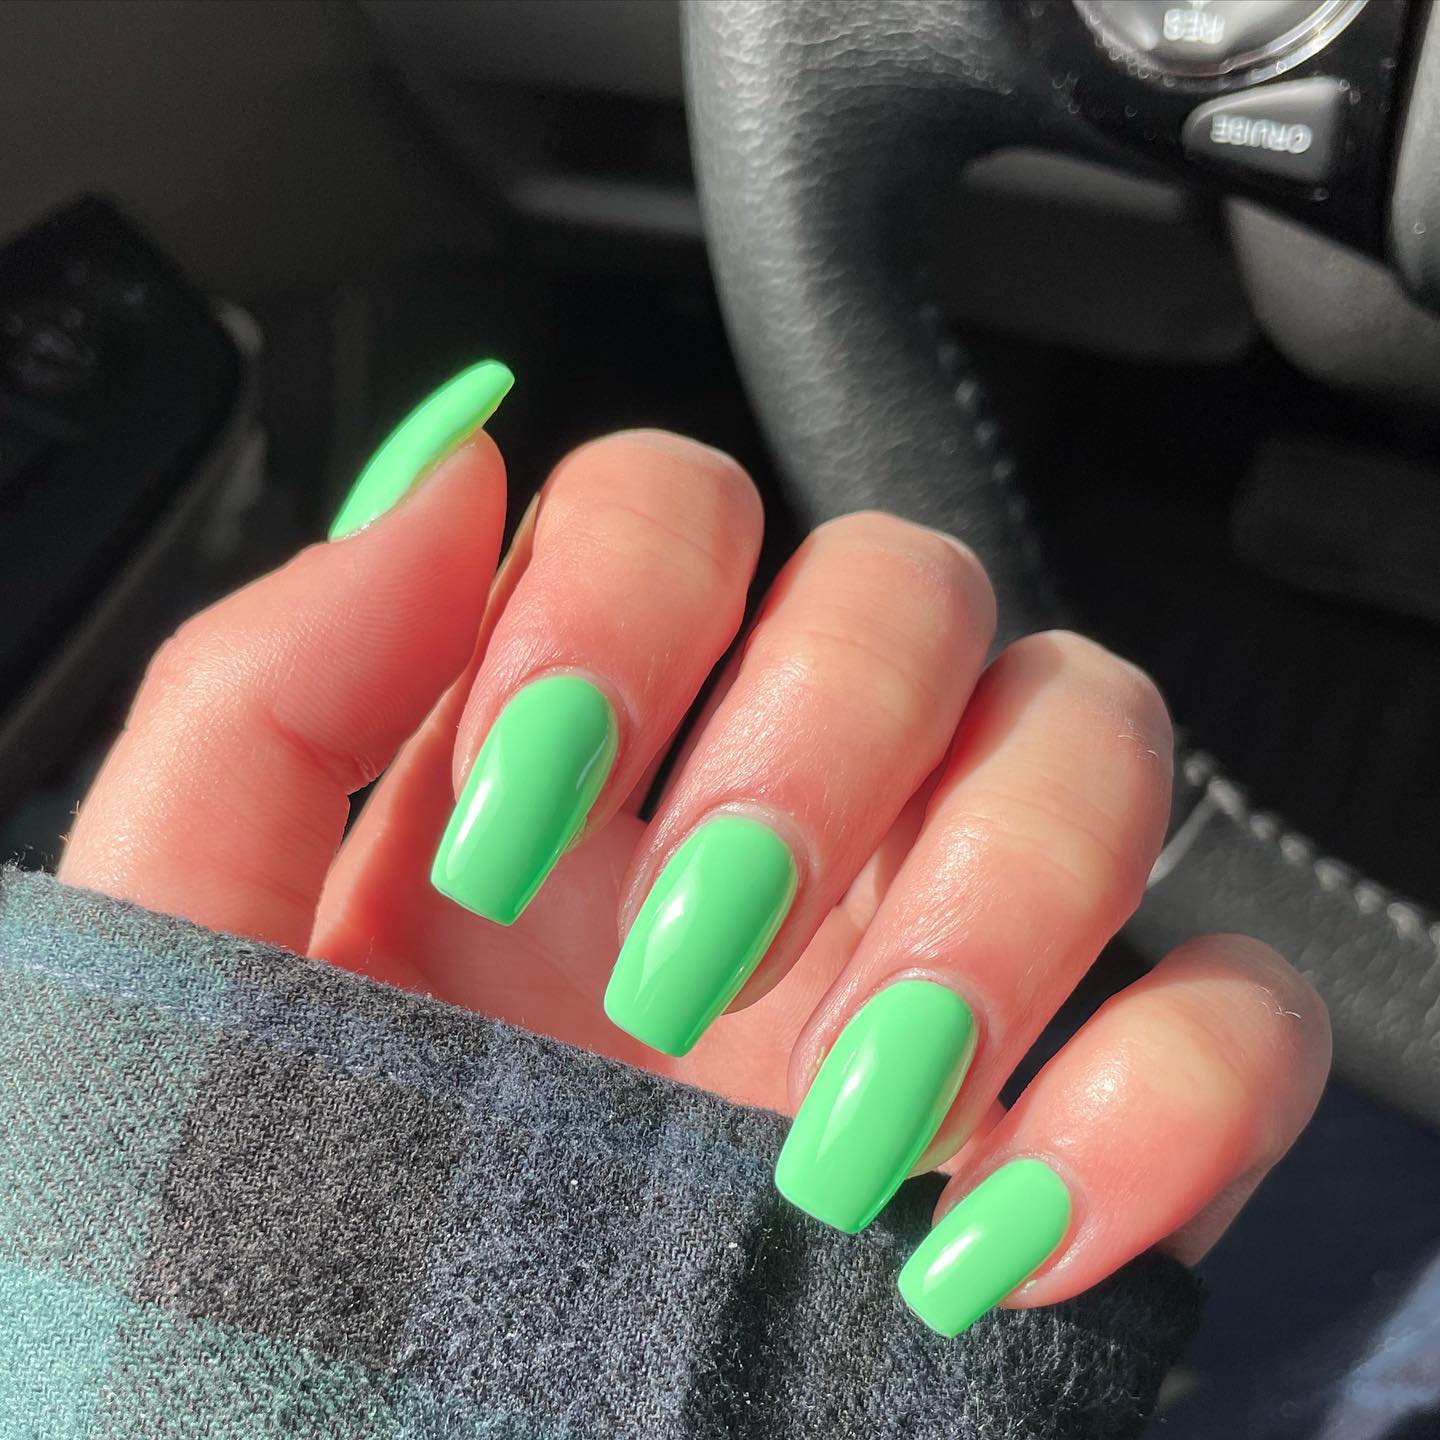 This cute shade of light green will take your nails to a different level! You will rock this summer with these.